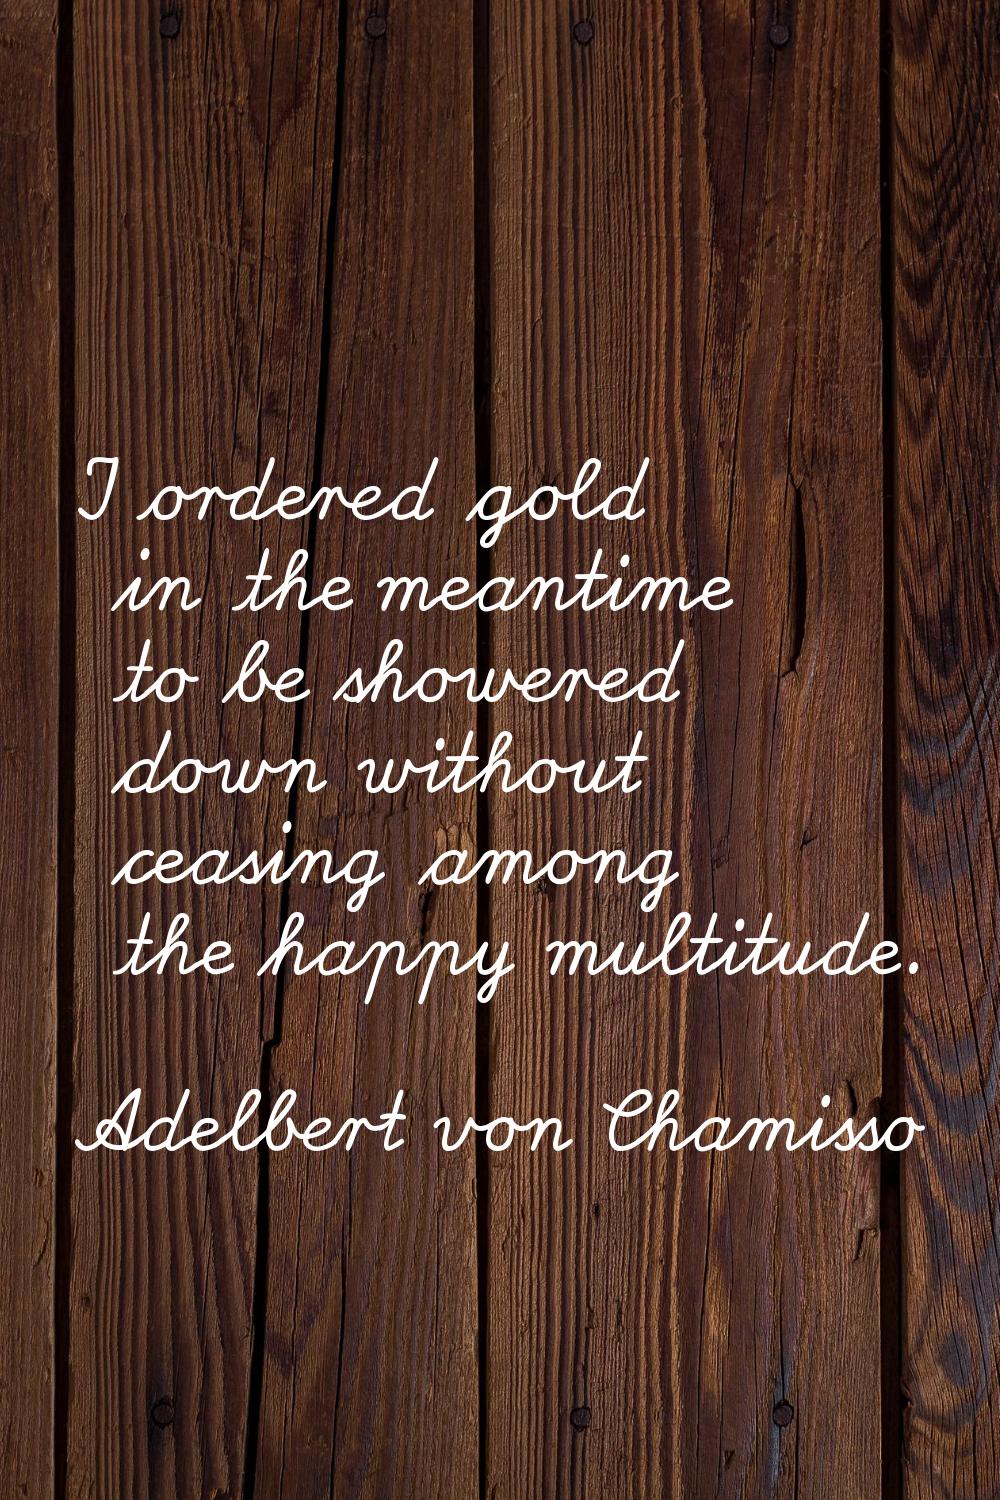 I ordered gold in the meantime to be showered down without ceasing among the happy multitude.